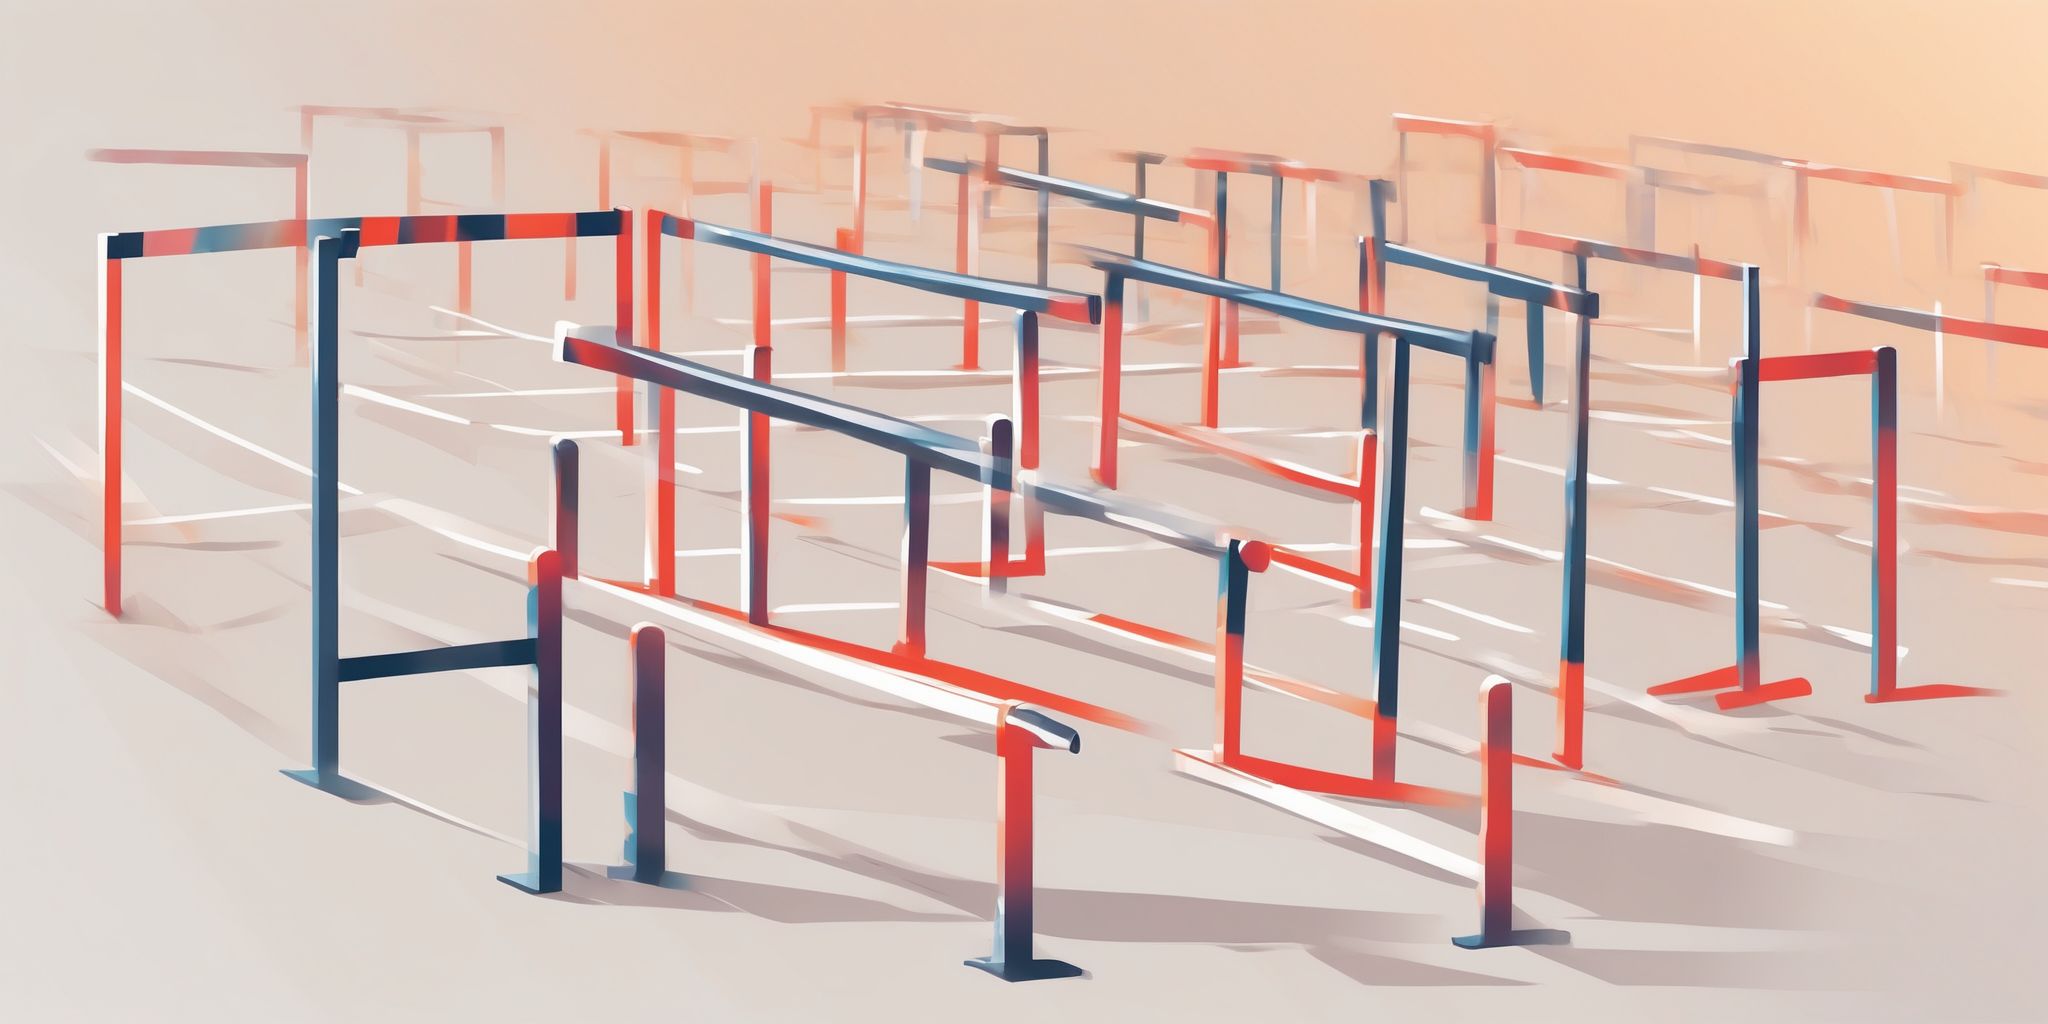 hurdles in illustration style with gradients and white background